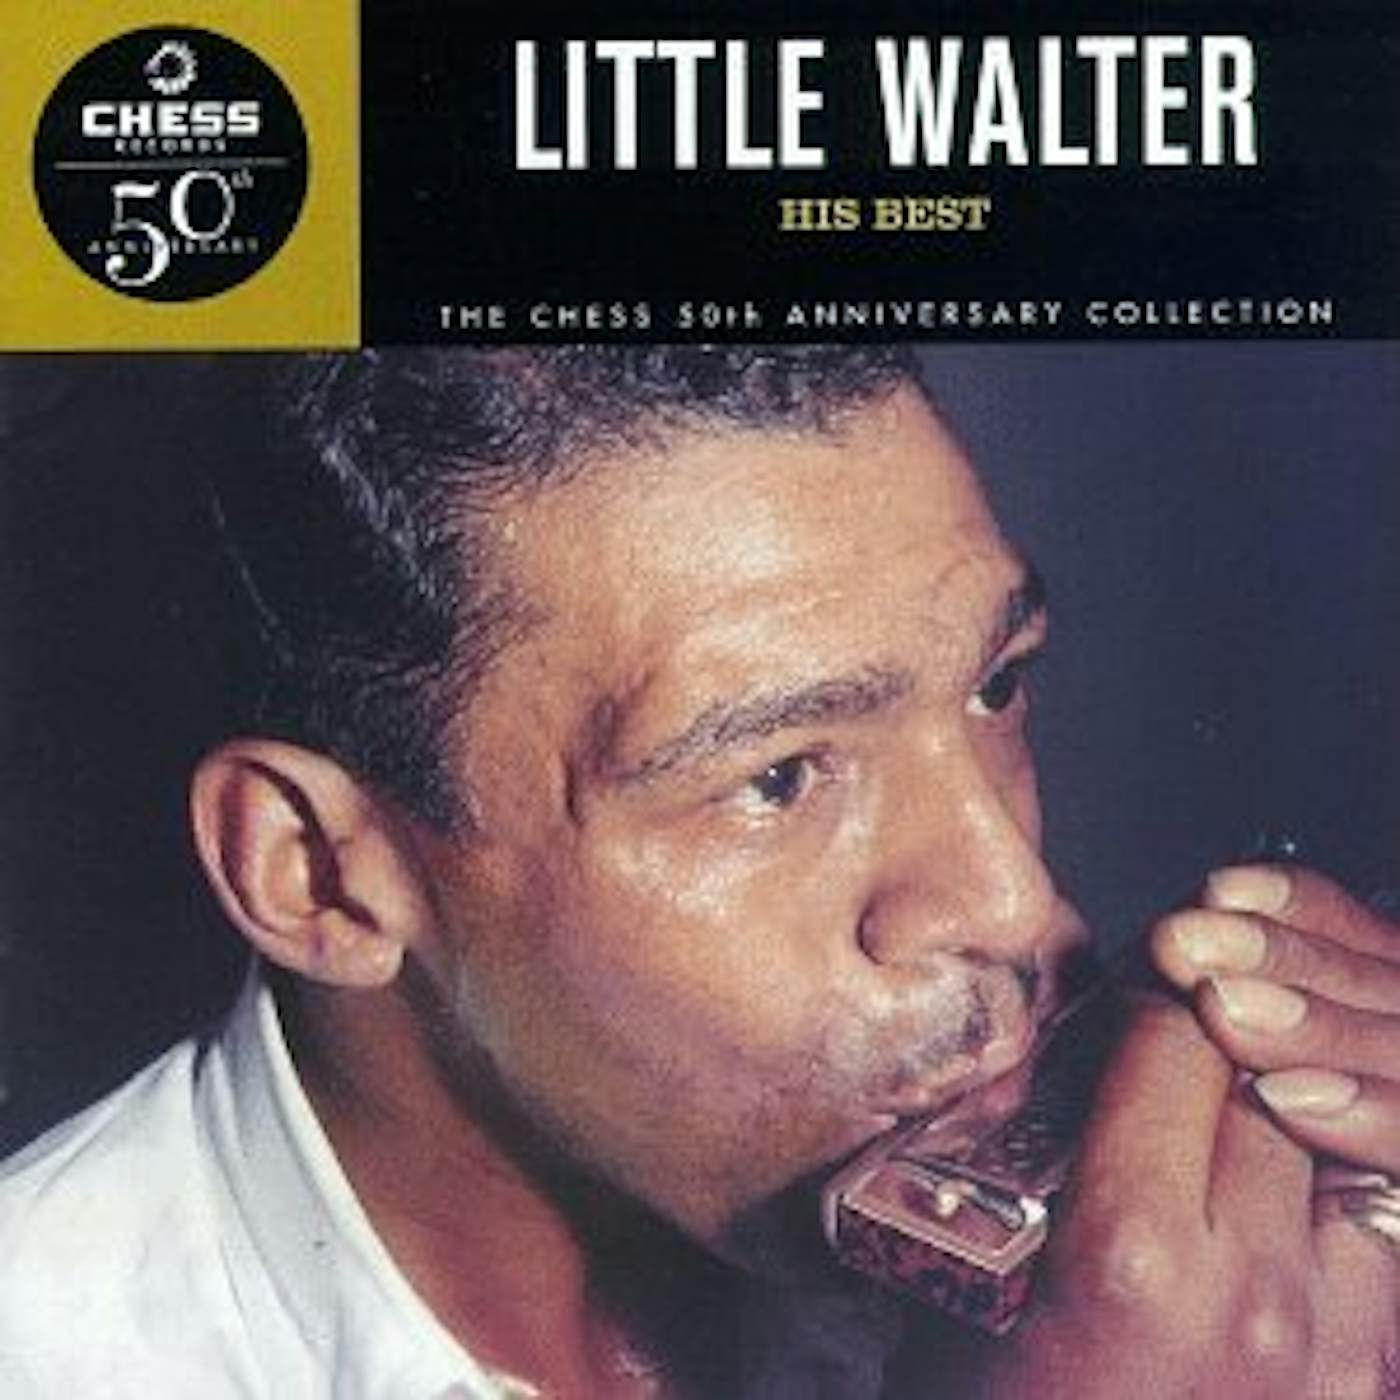 Little Walter HIS BEST: CHESS 50TH ANNIVERSARY COLLECTION CD